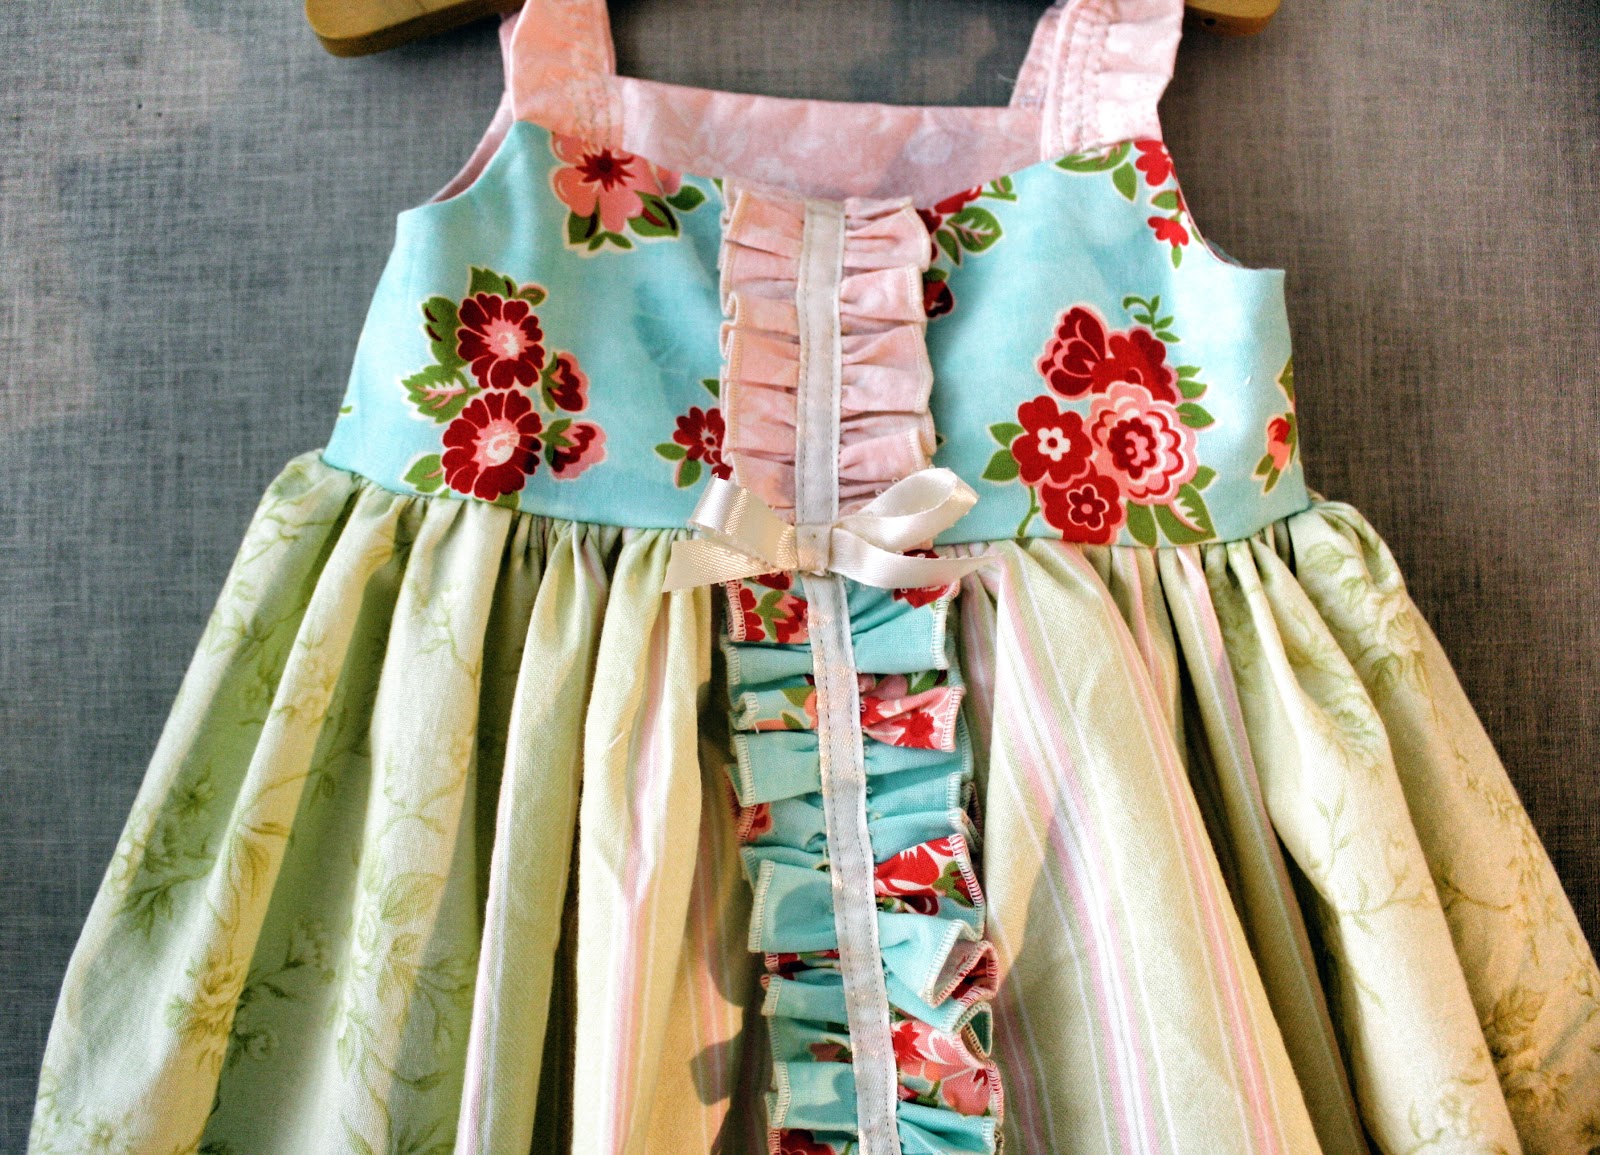 sew grown: Quilted dress made from scrap fabric.